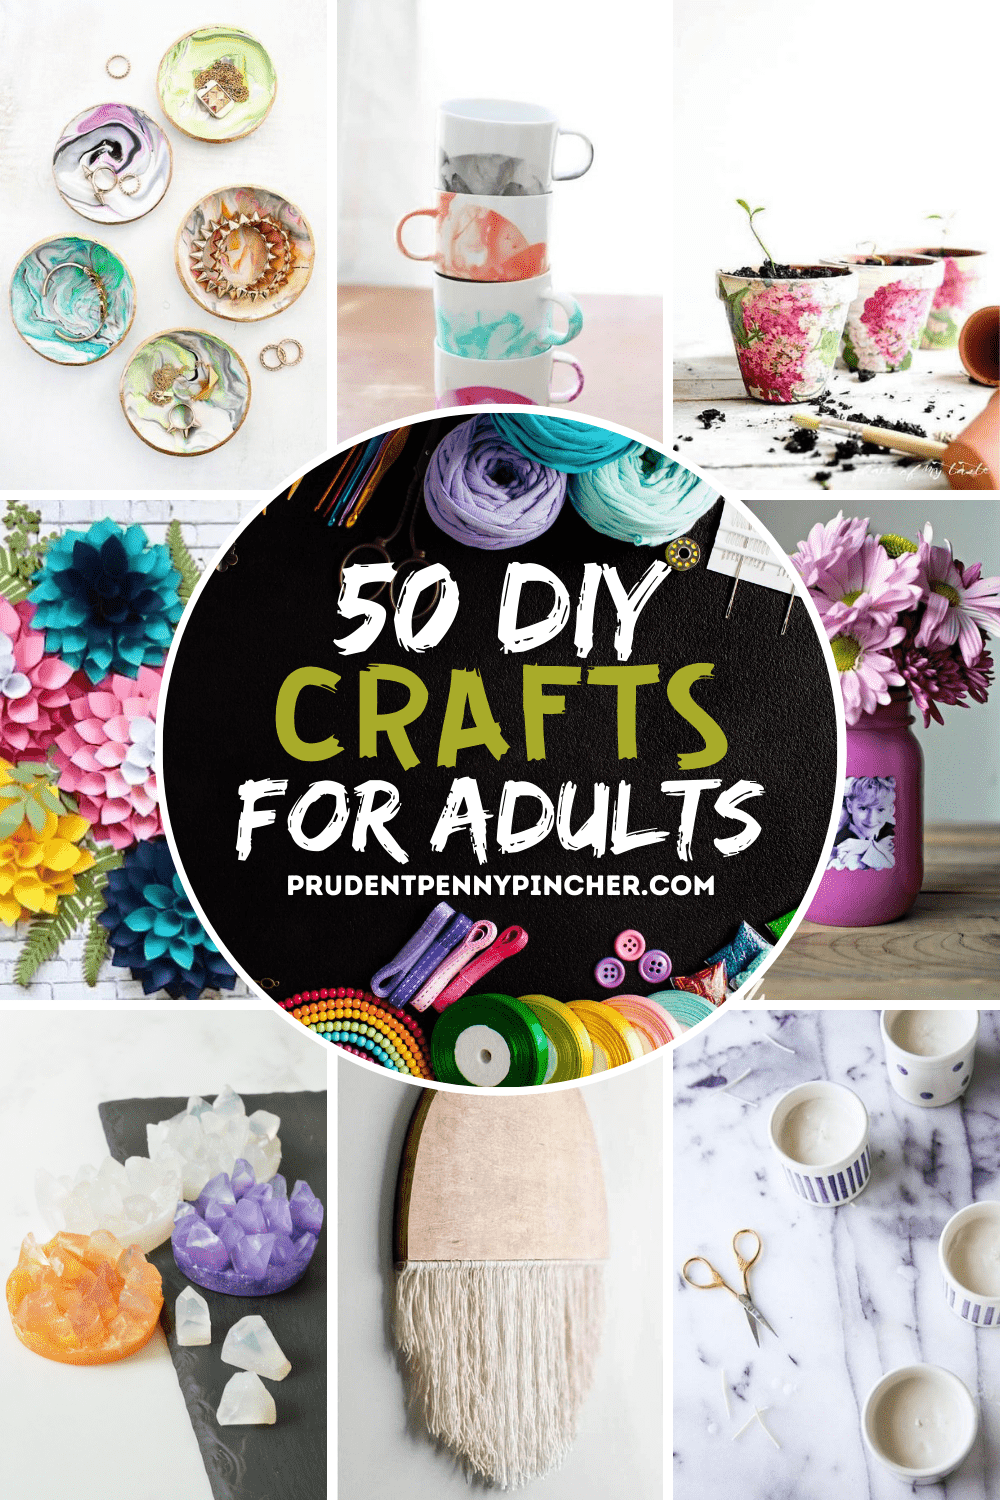 60 Diy Crafts For S Prudent